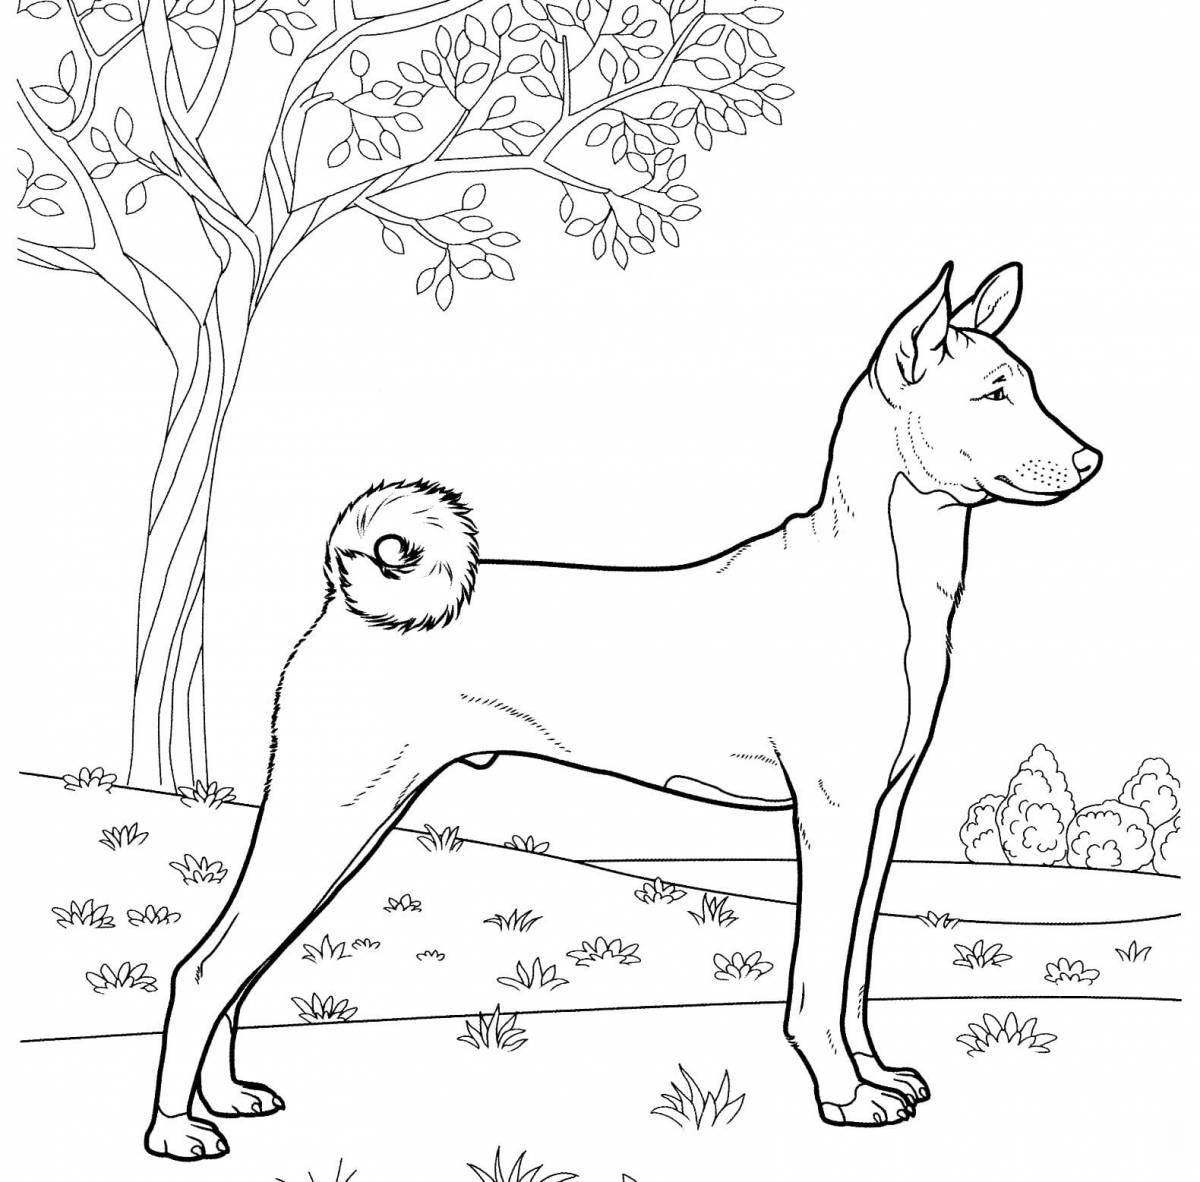 Friendly real dog coloring book